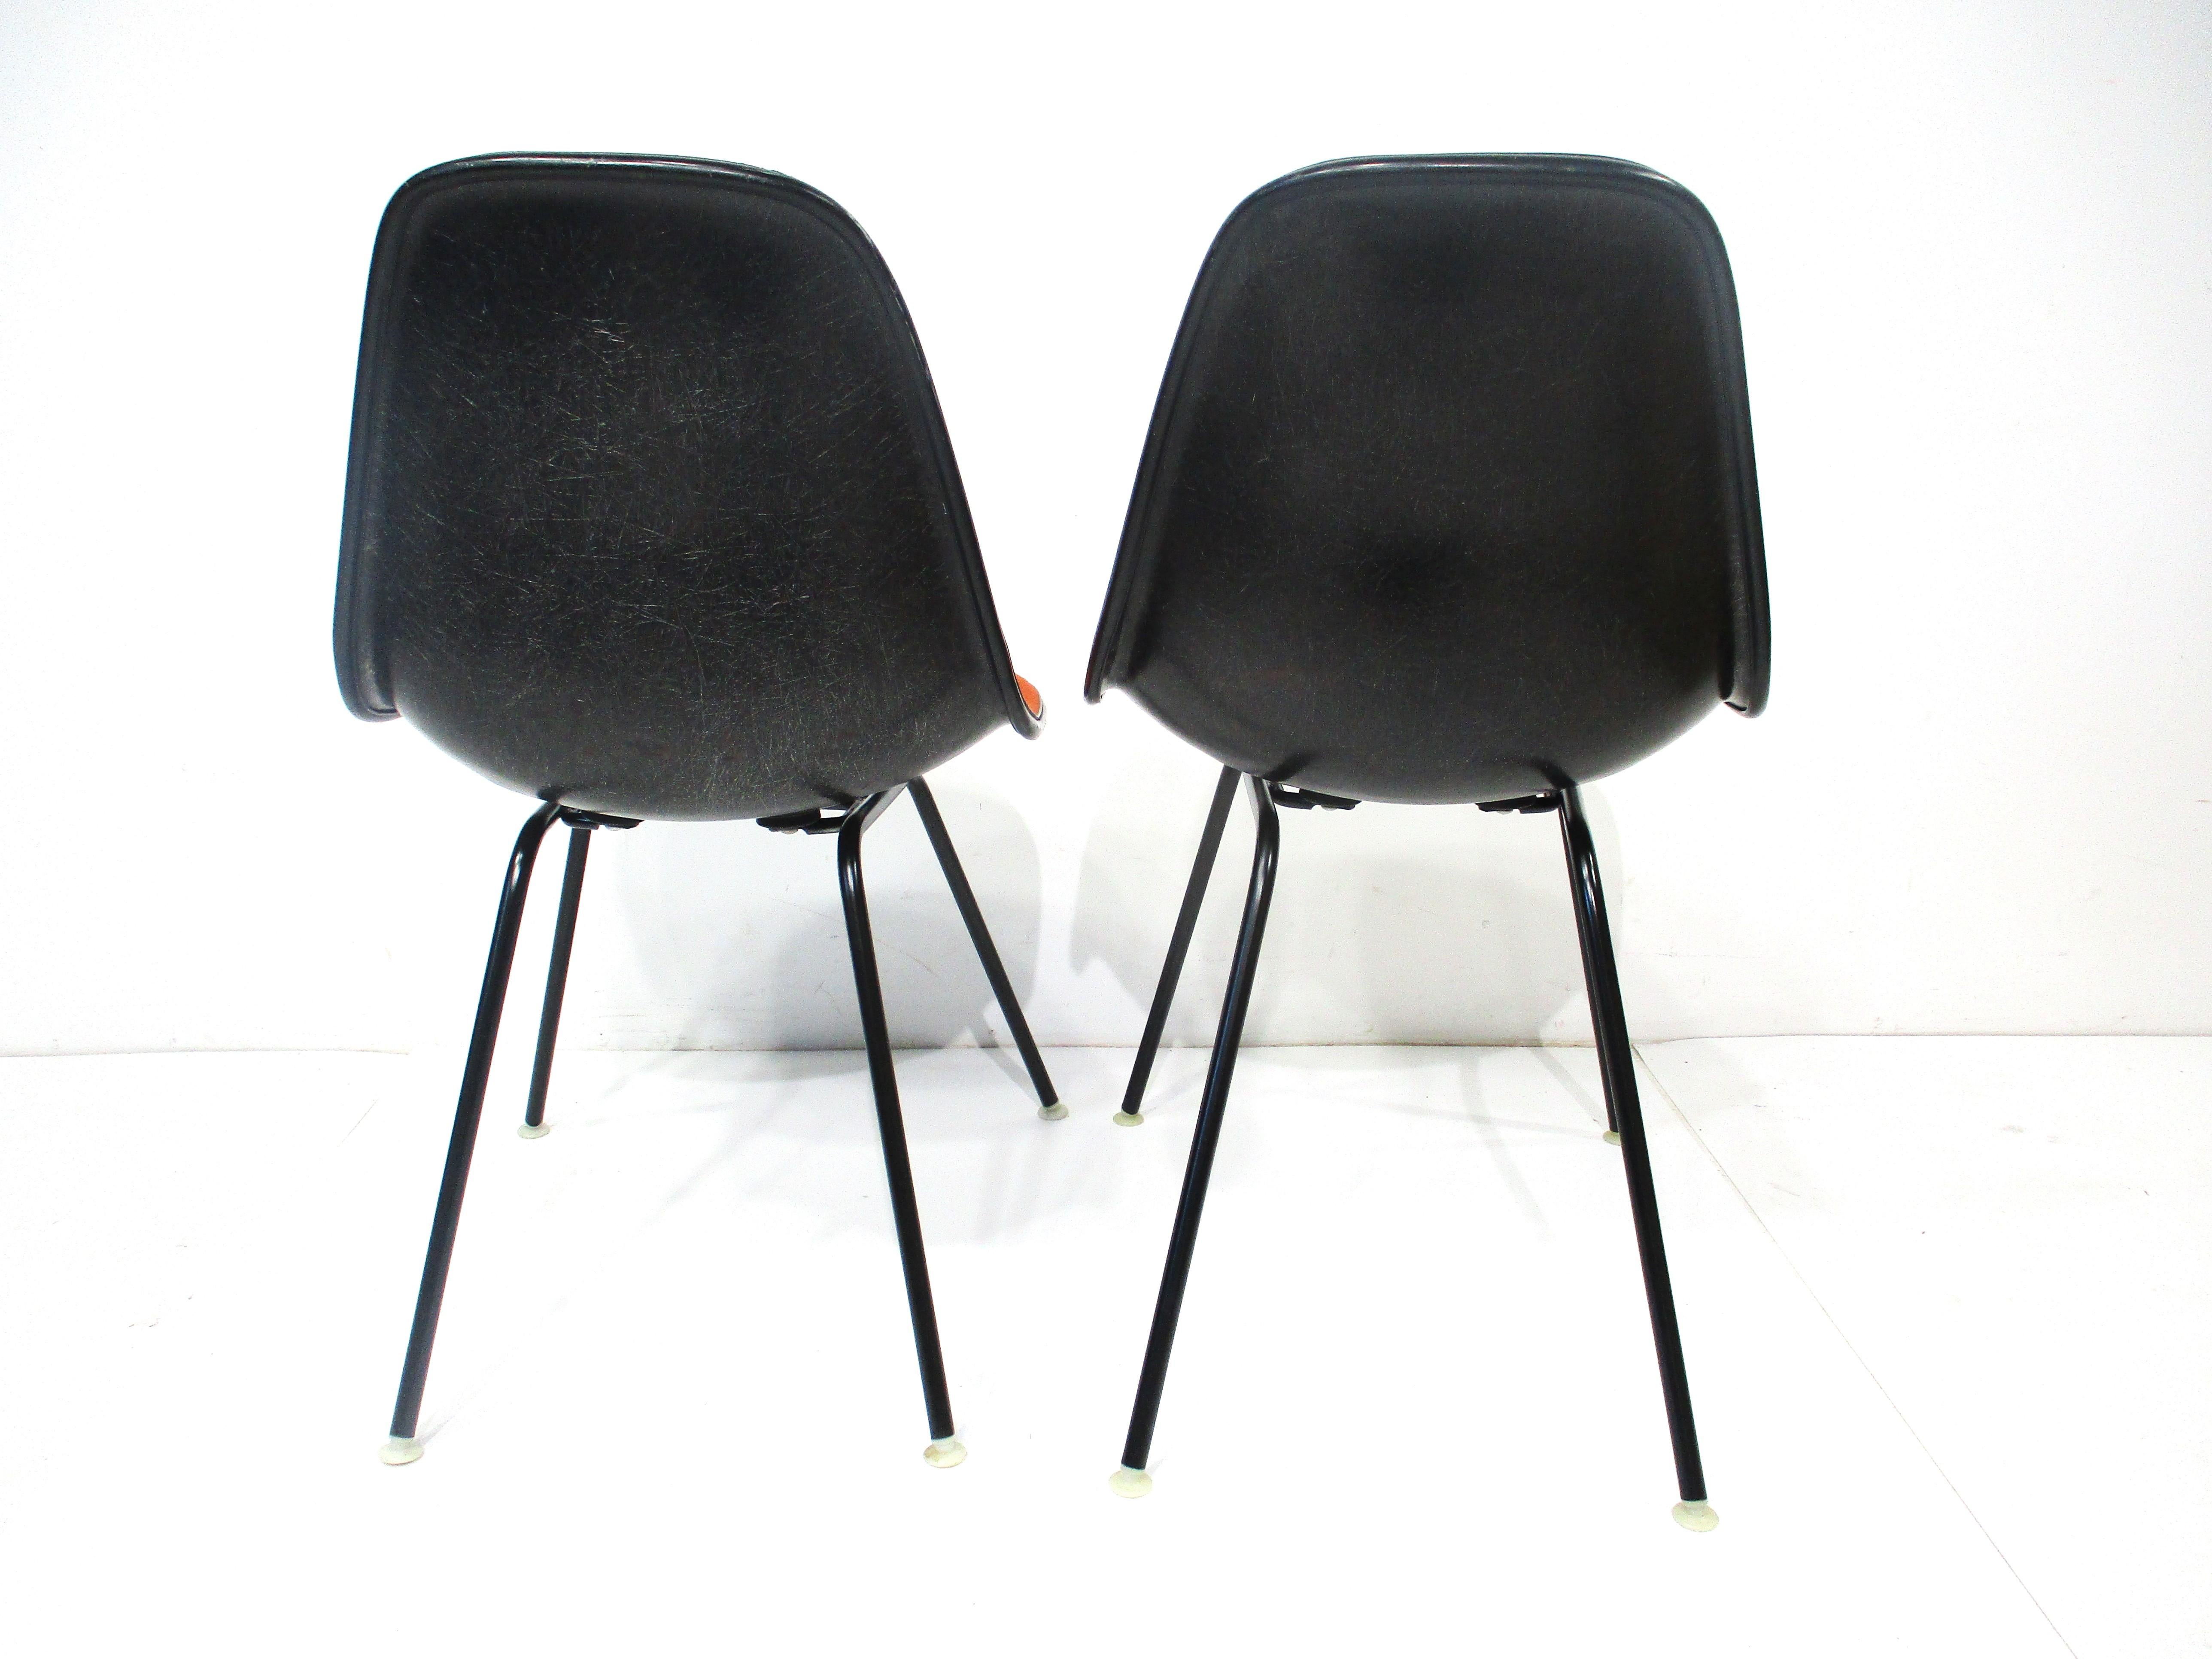 Eames Upholstered H Based Side Chairs for Herman Miller Pair In Good Condition For Sale In Cincinnati, OH